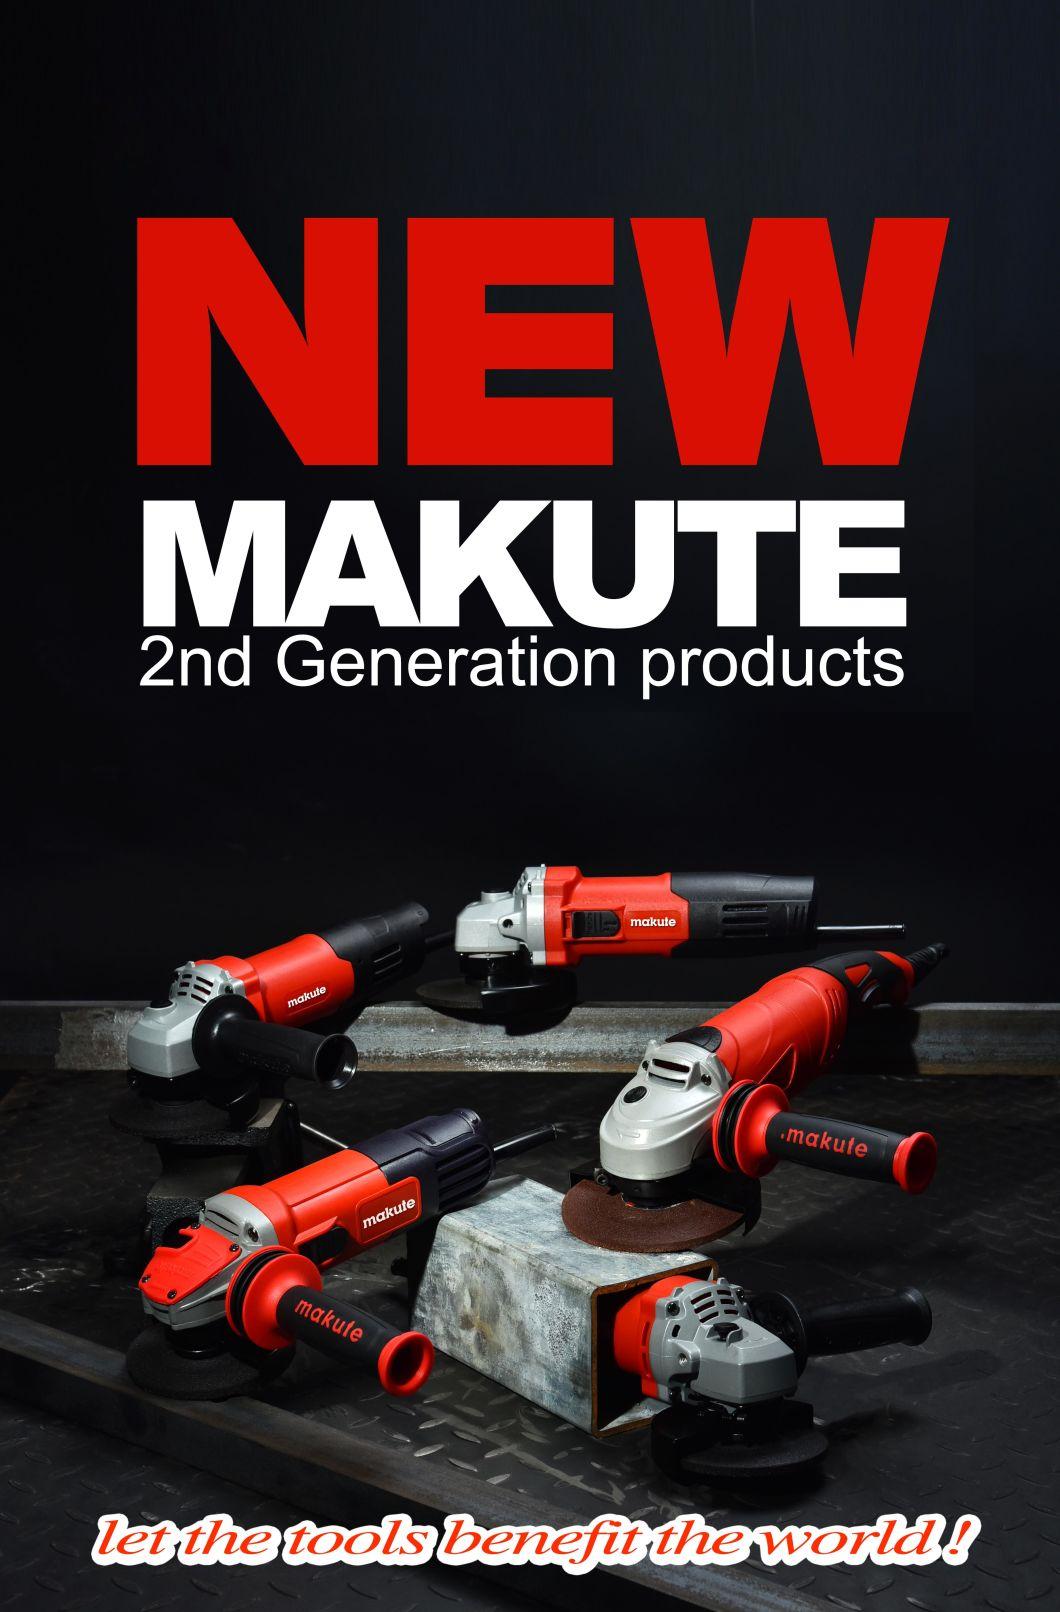 Makute Electric 100mm Mini 850W Angle Grinder with Long Handle